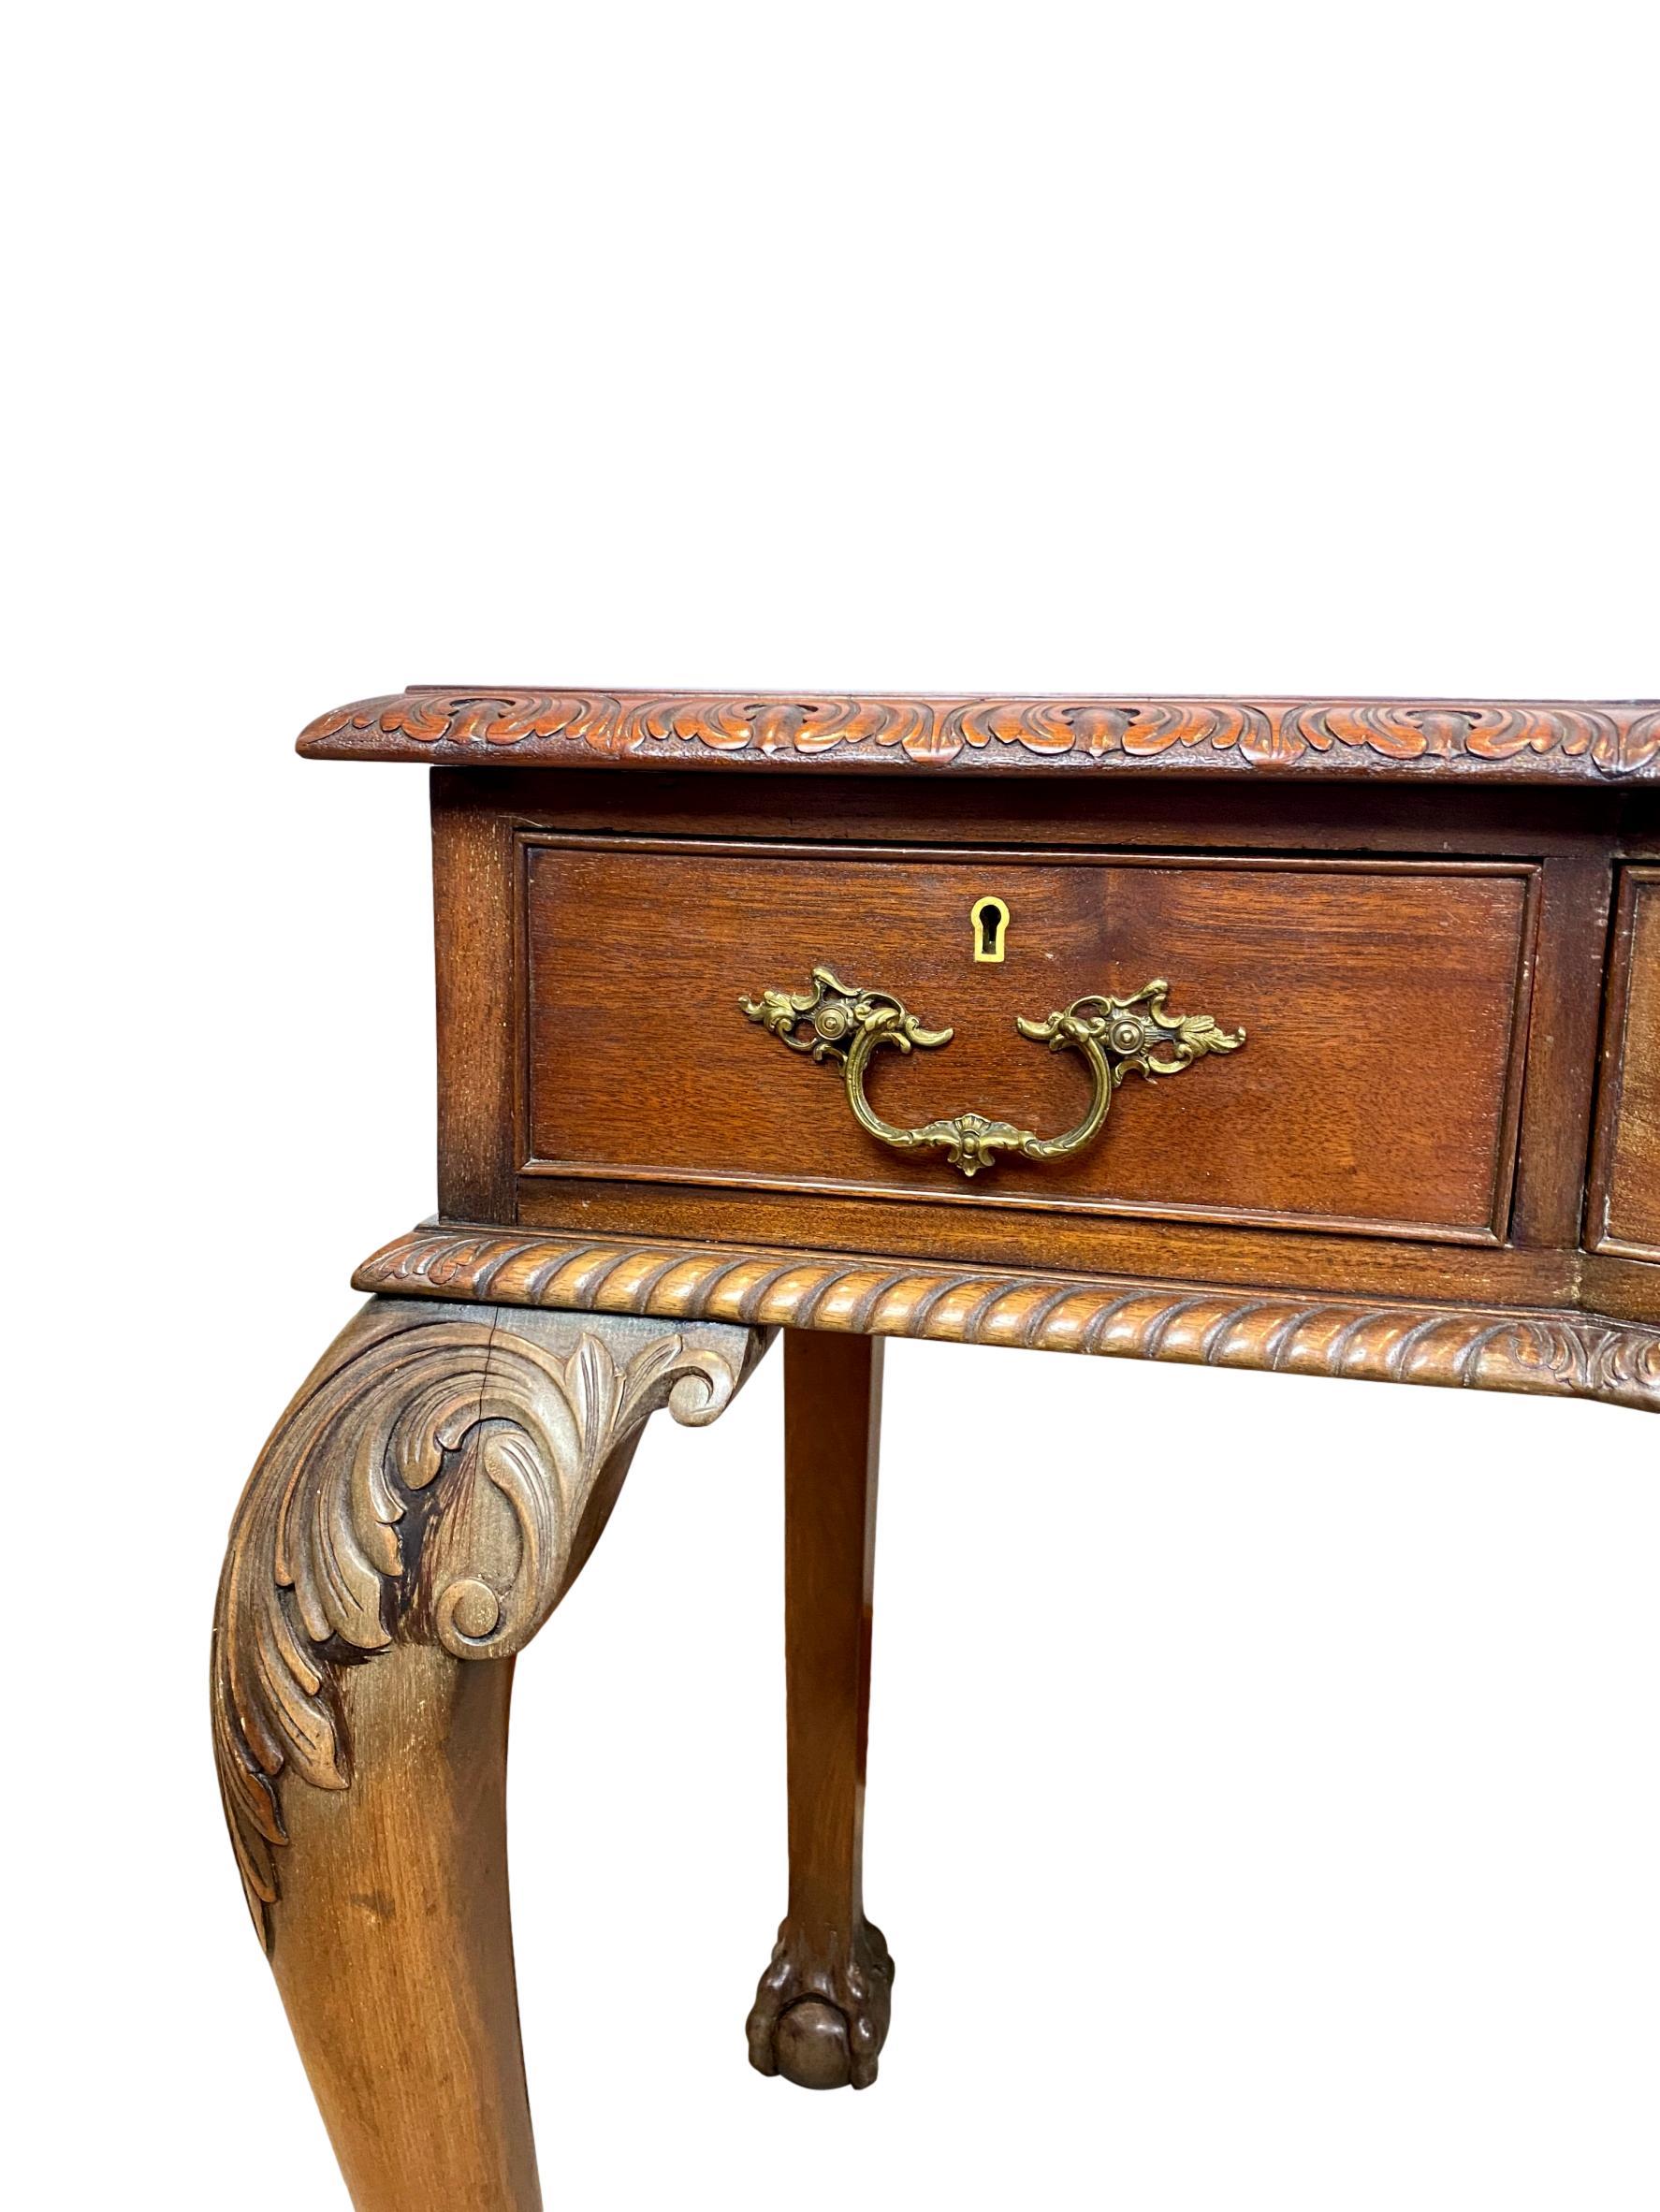 Chippendale Revival Mahogany Three-Drawer Console Table, English, circa 1880 For Sale 1